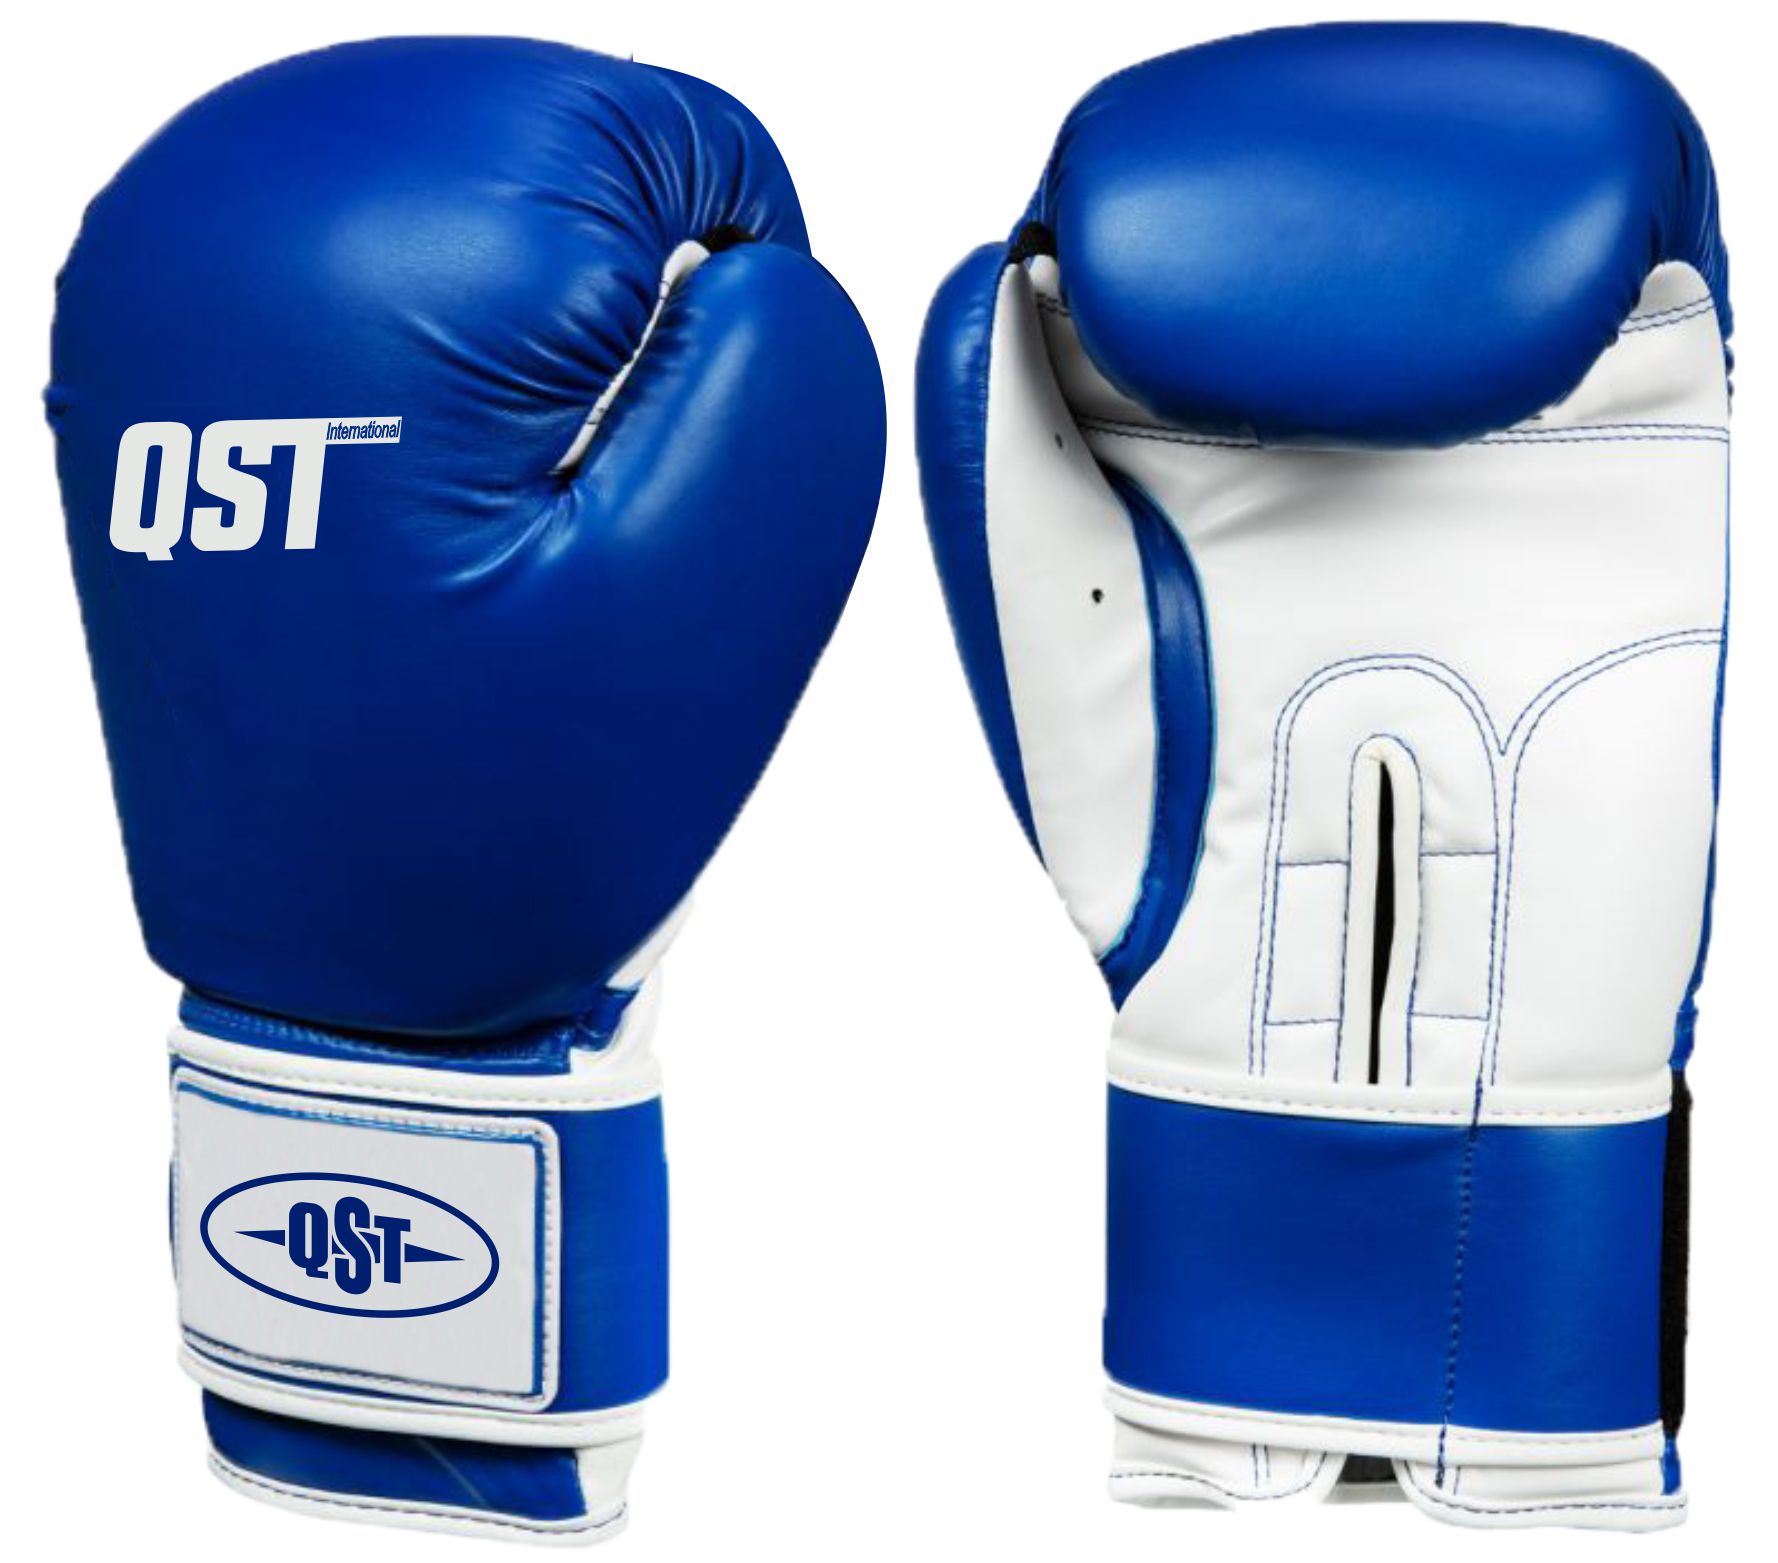 Professional Boxing Gloves - PRG-1514